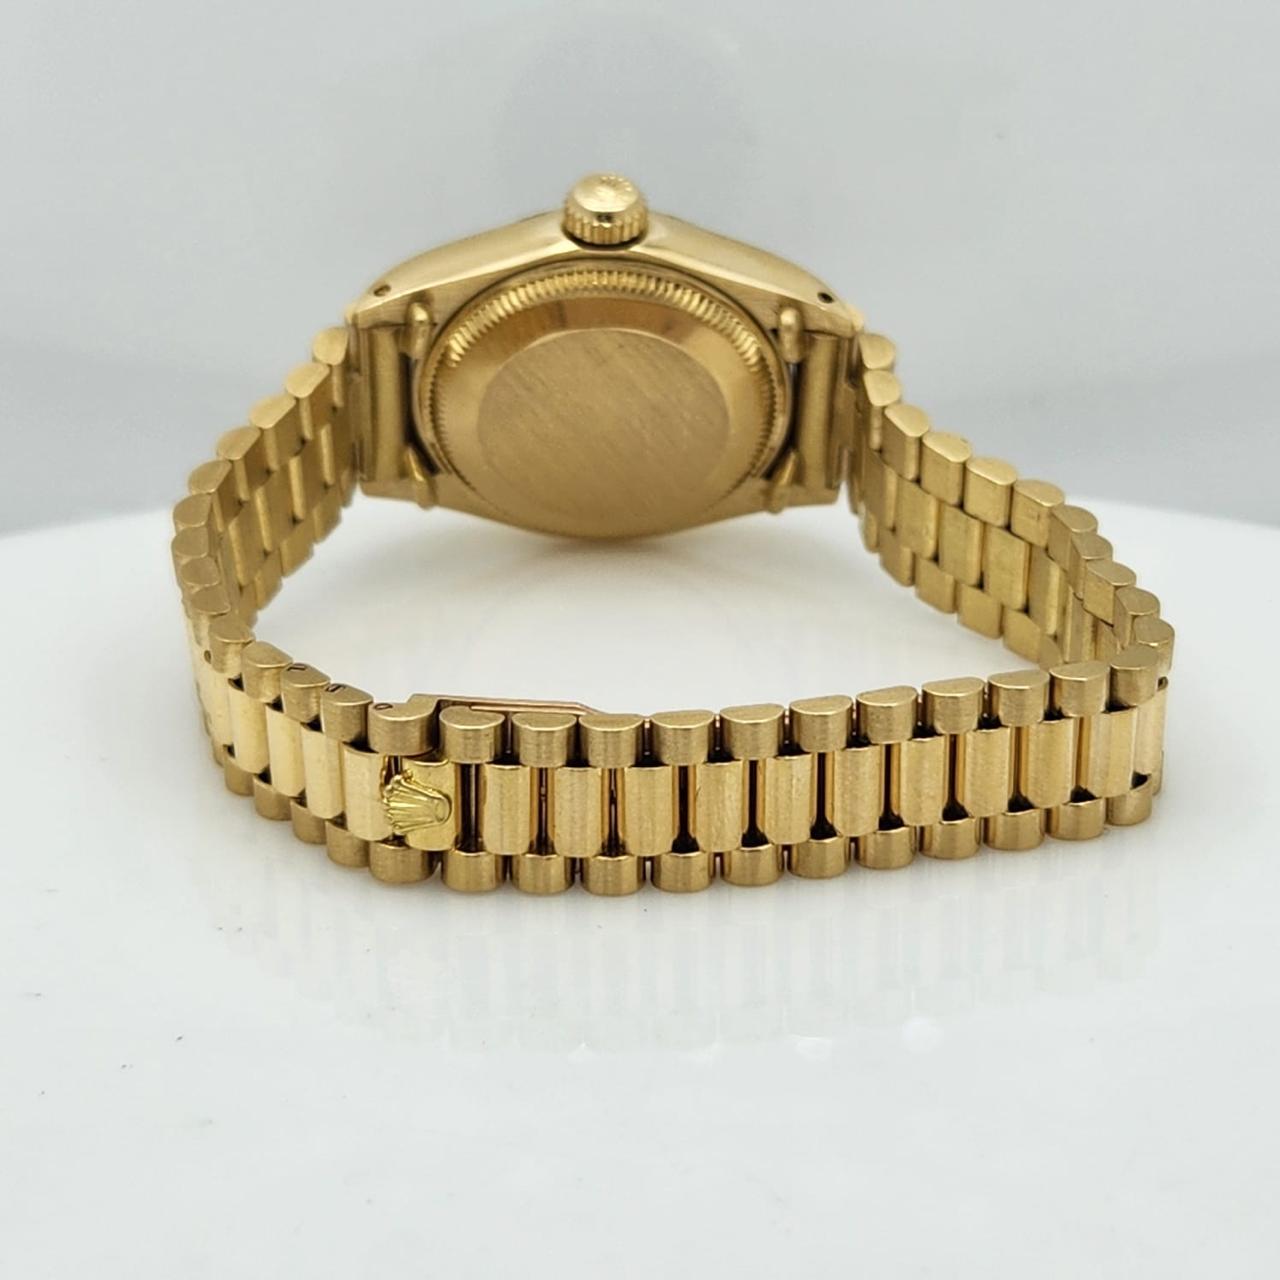 Rolex Lady-Datejust Presidente Wood Dial Full Gold 26mm Completo